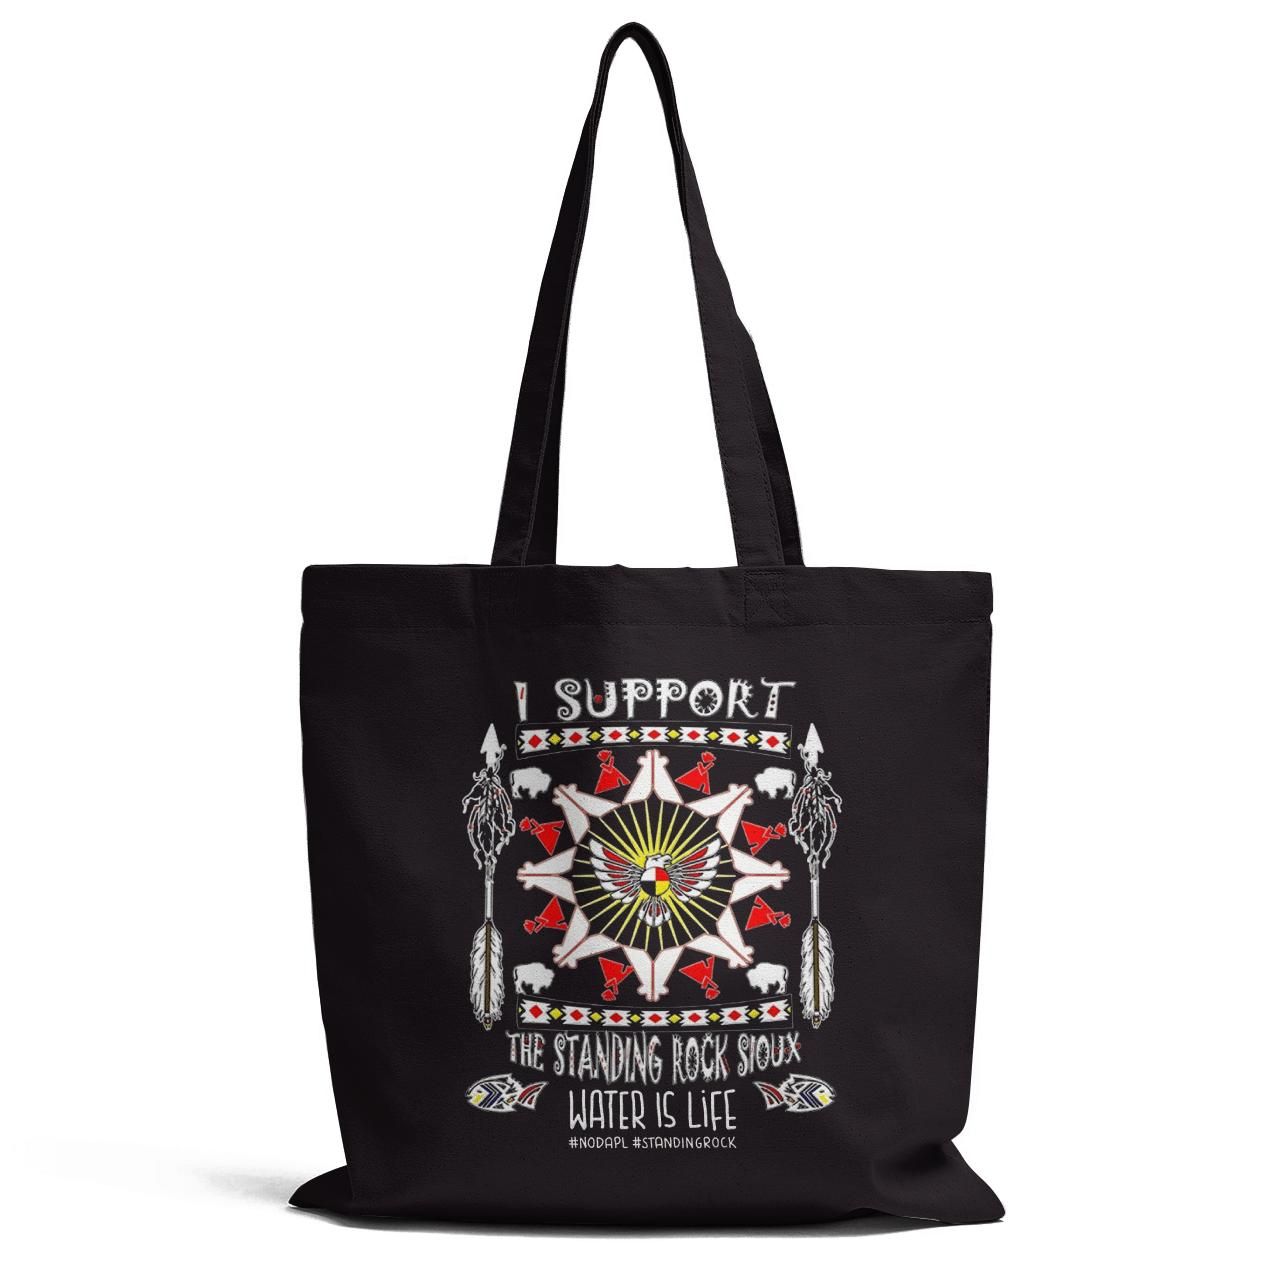 I Support The Standing Rock Sioux Tote Bag